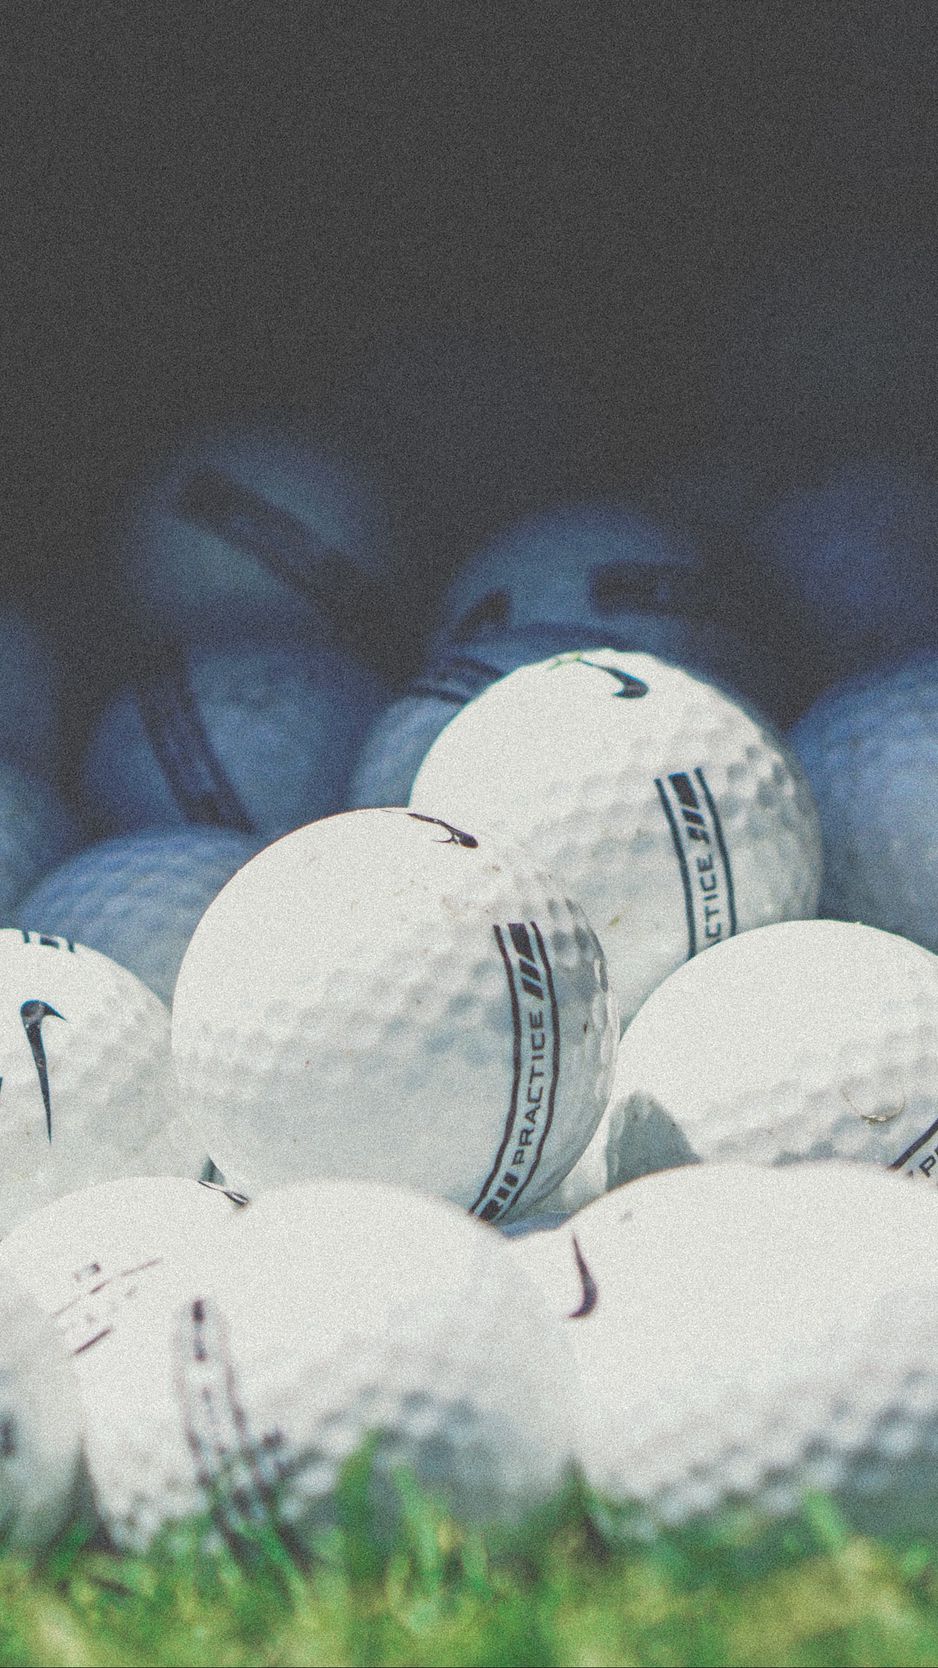 Download wallpaper 938x1668 golf, balls, nike iphone 8/7/6s/6 for parallax  hd background